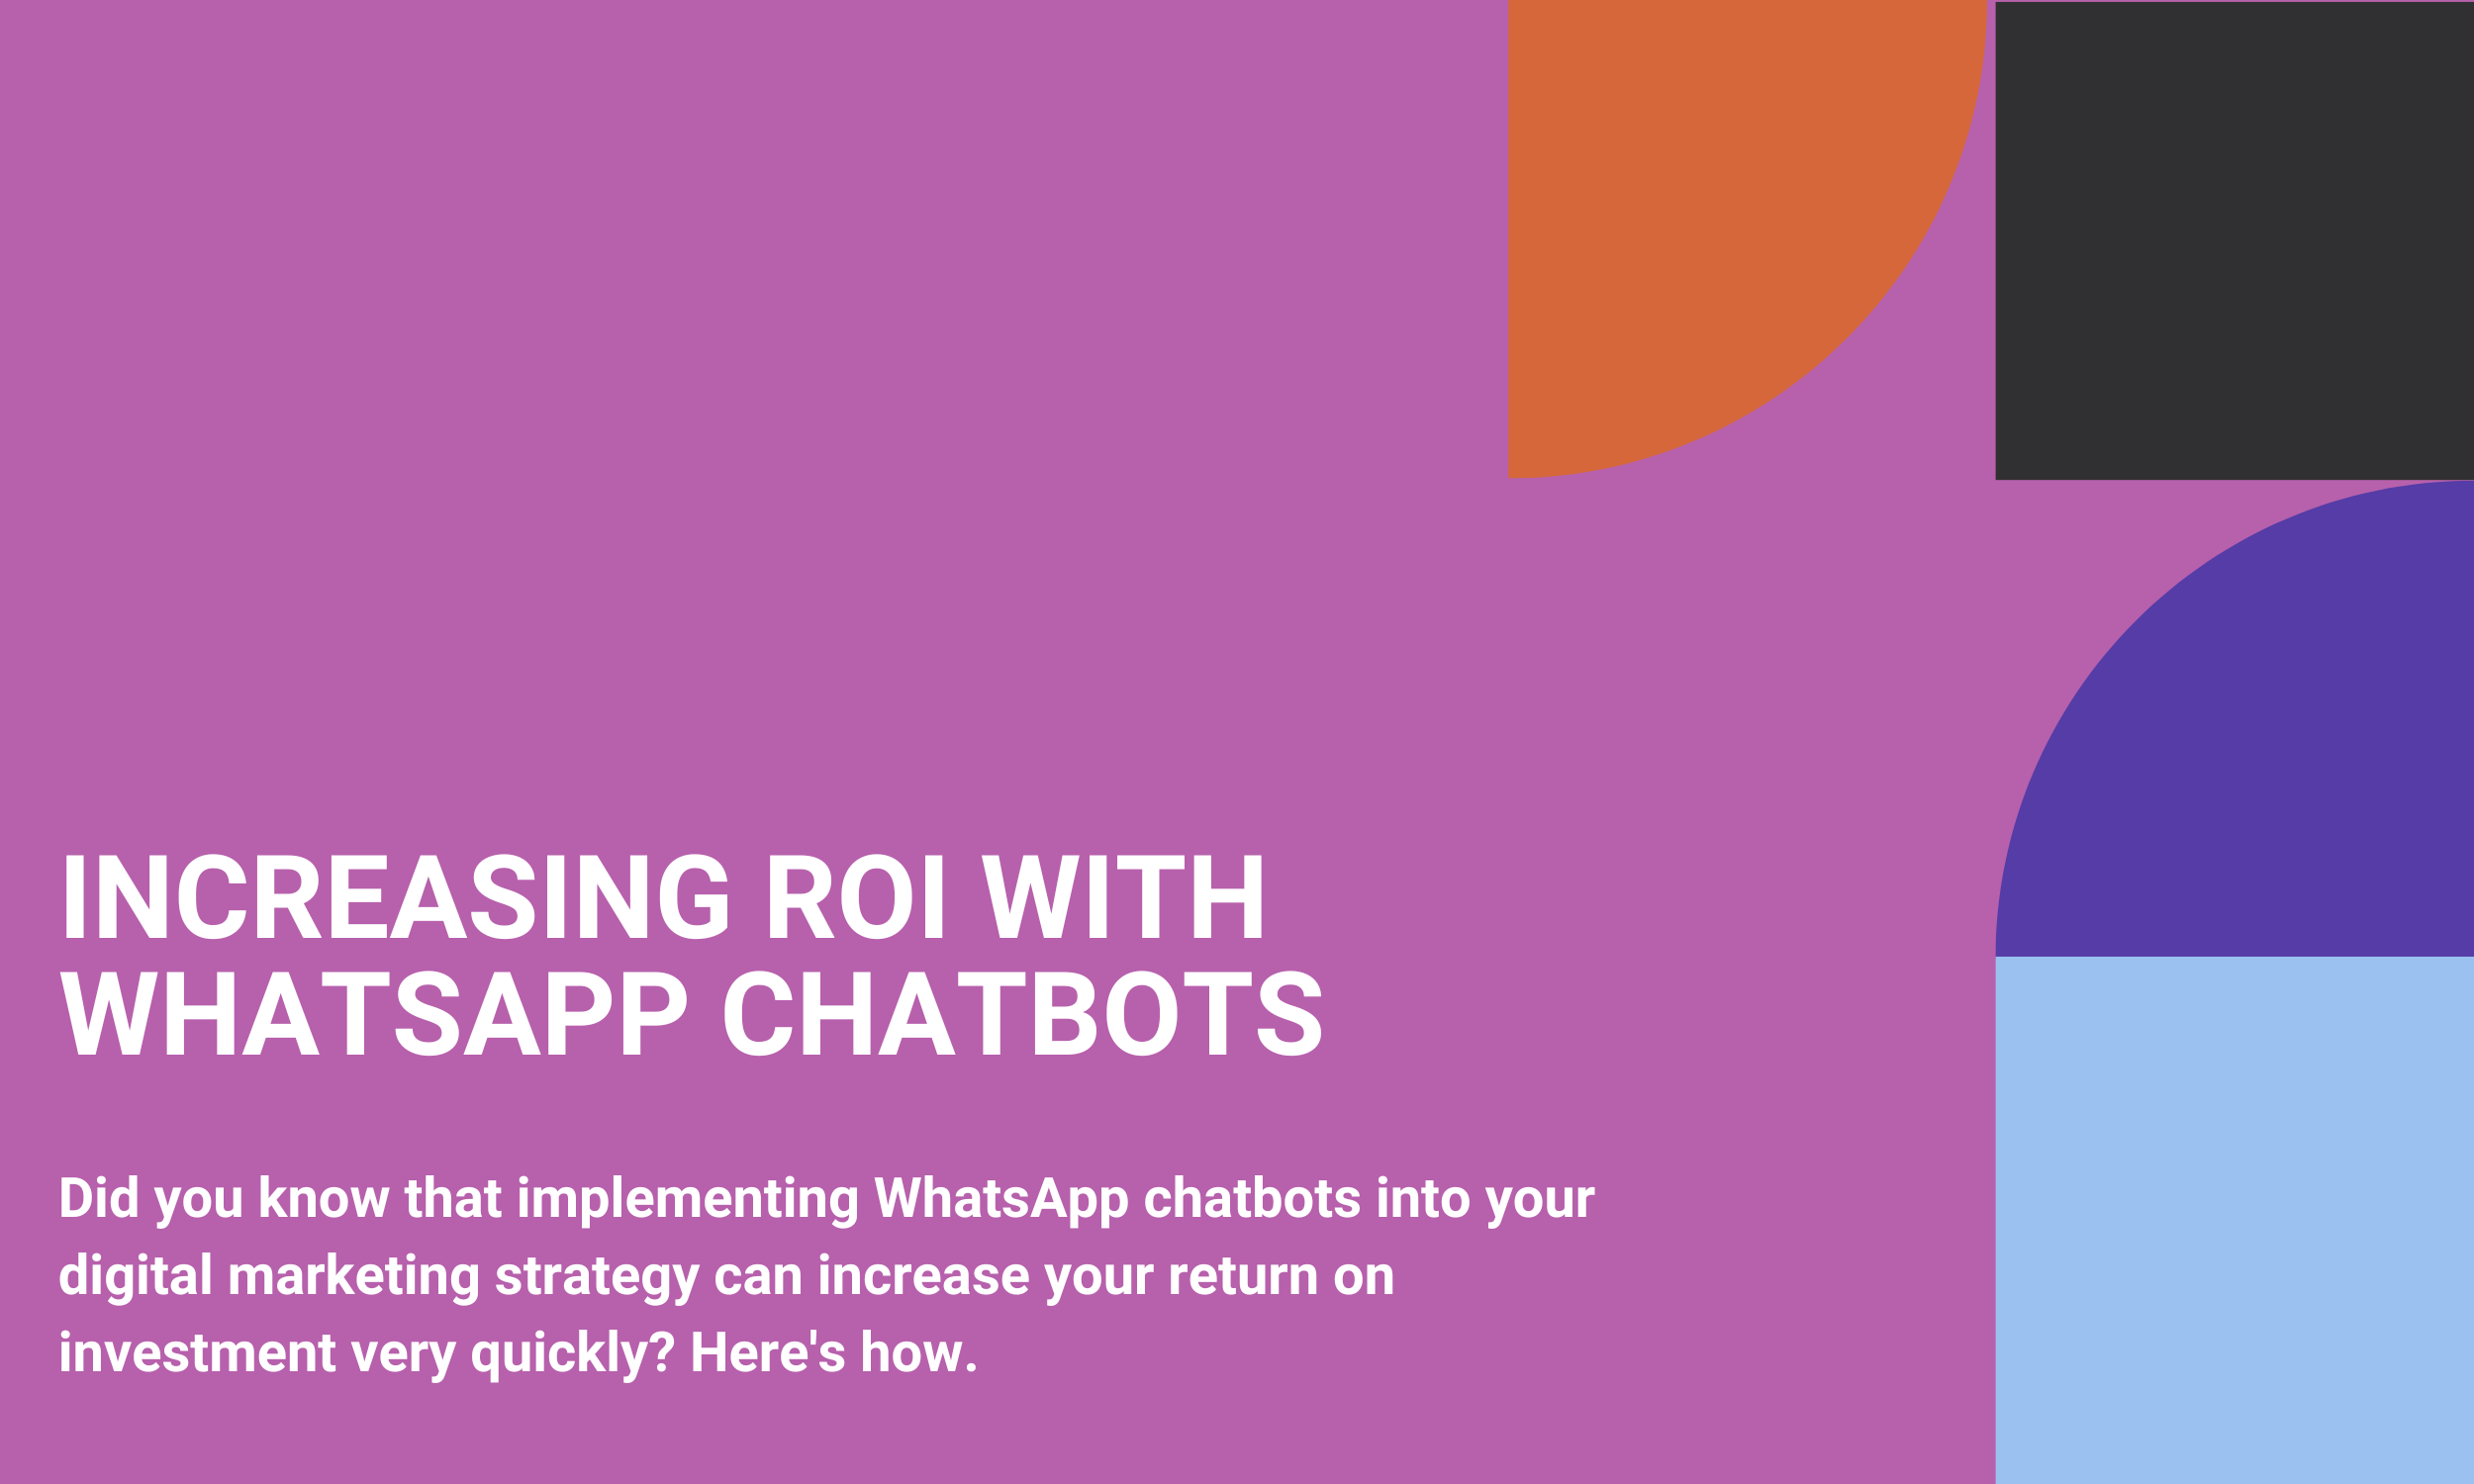 Increasing ROI With WhatsApp Chatbots